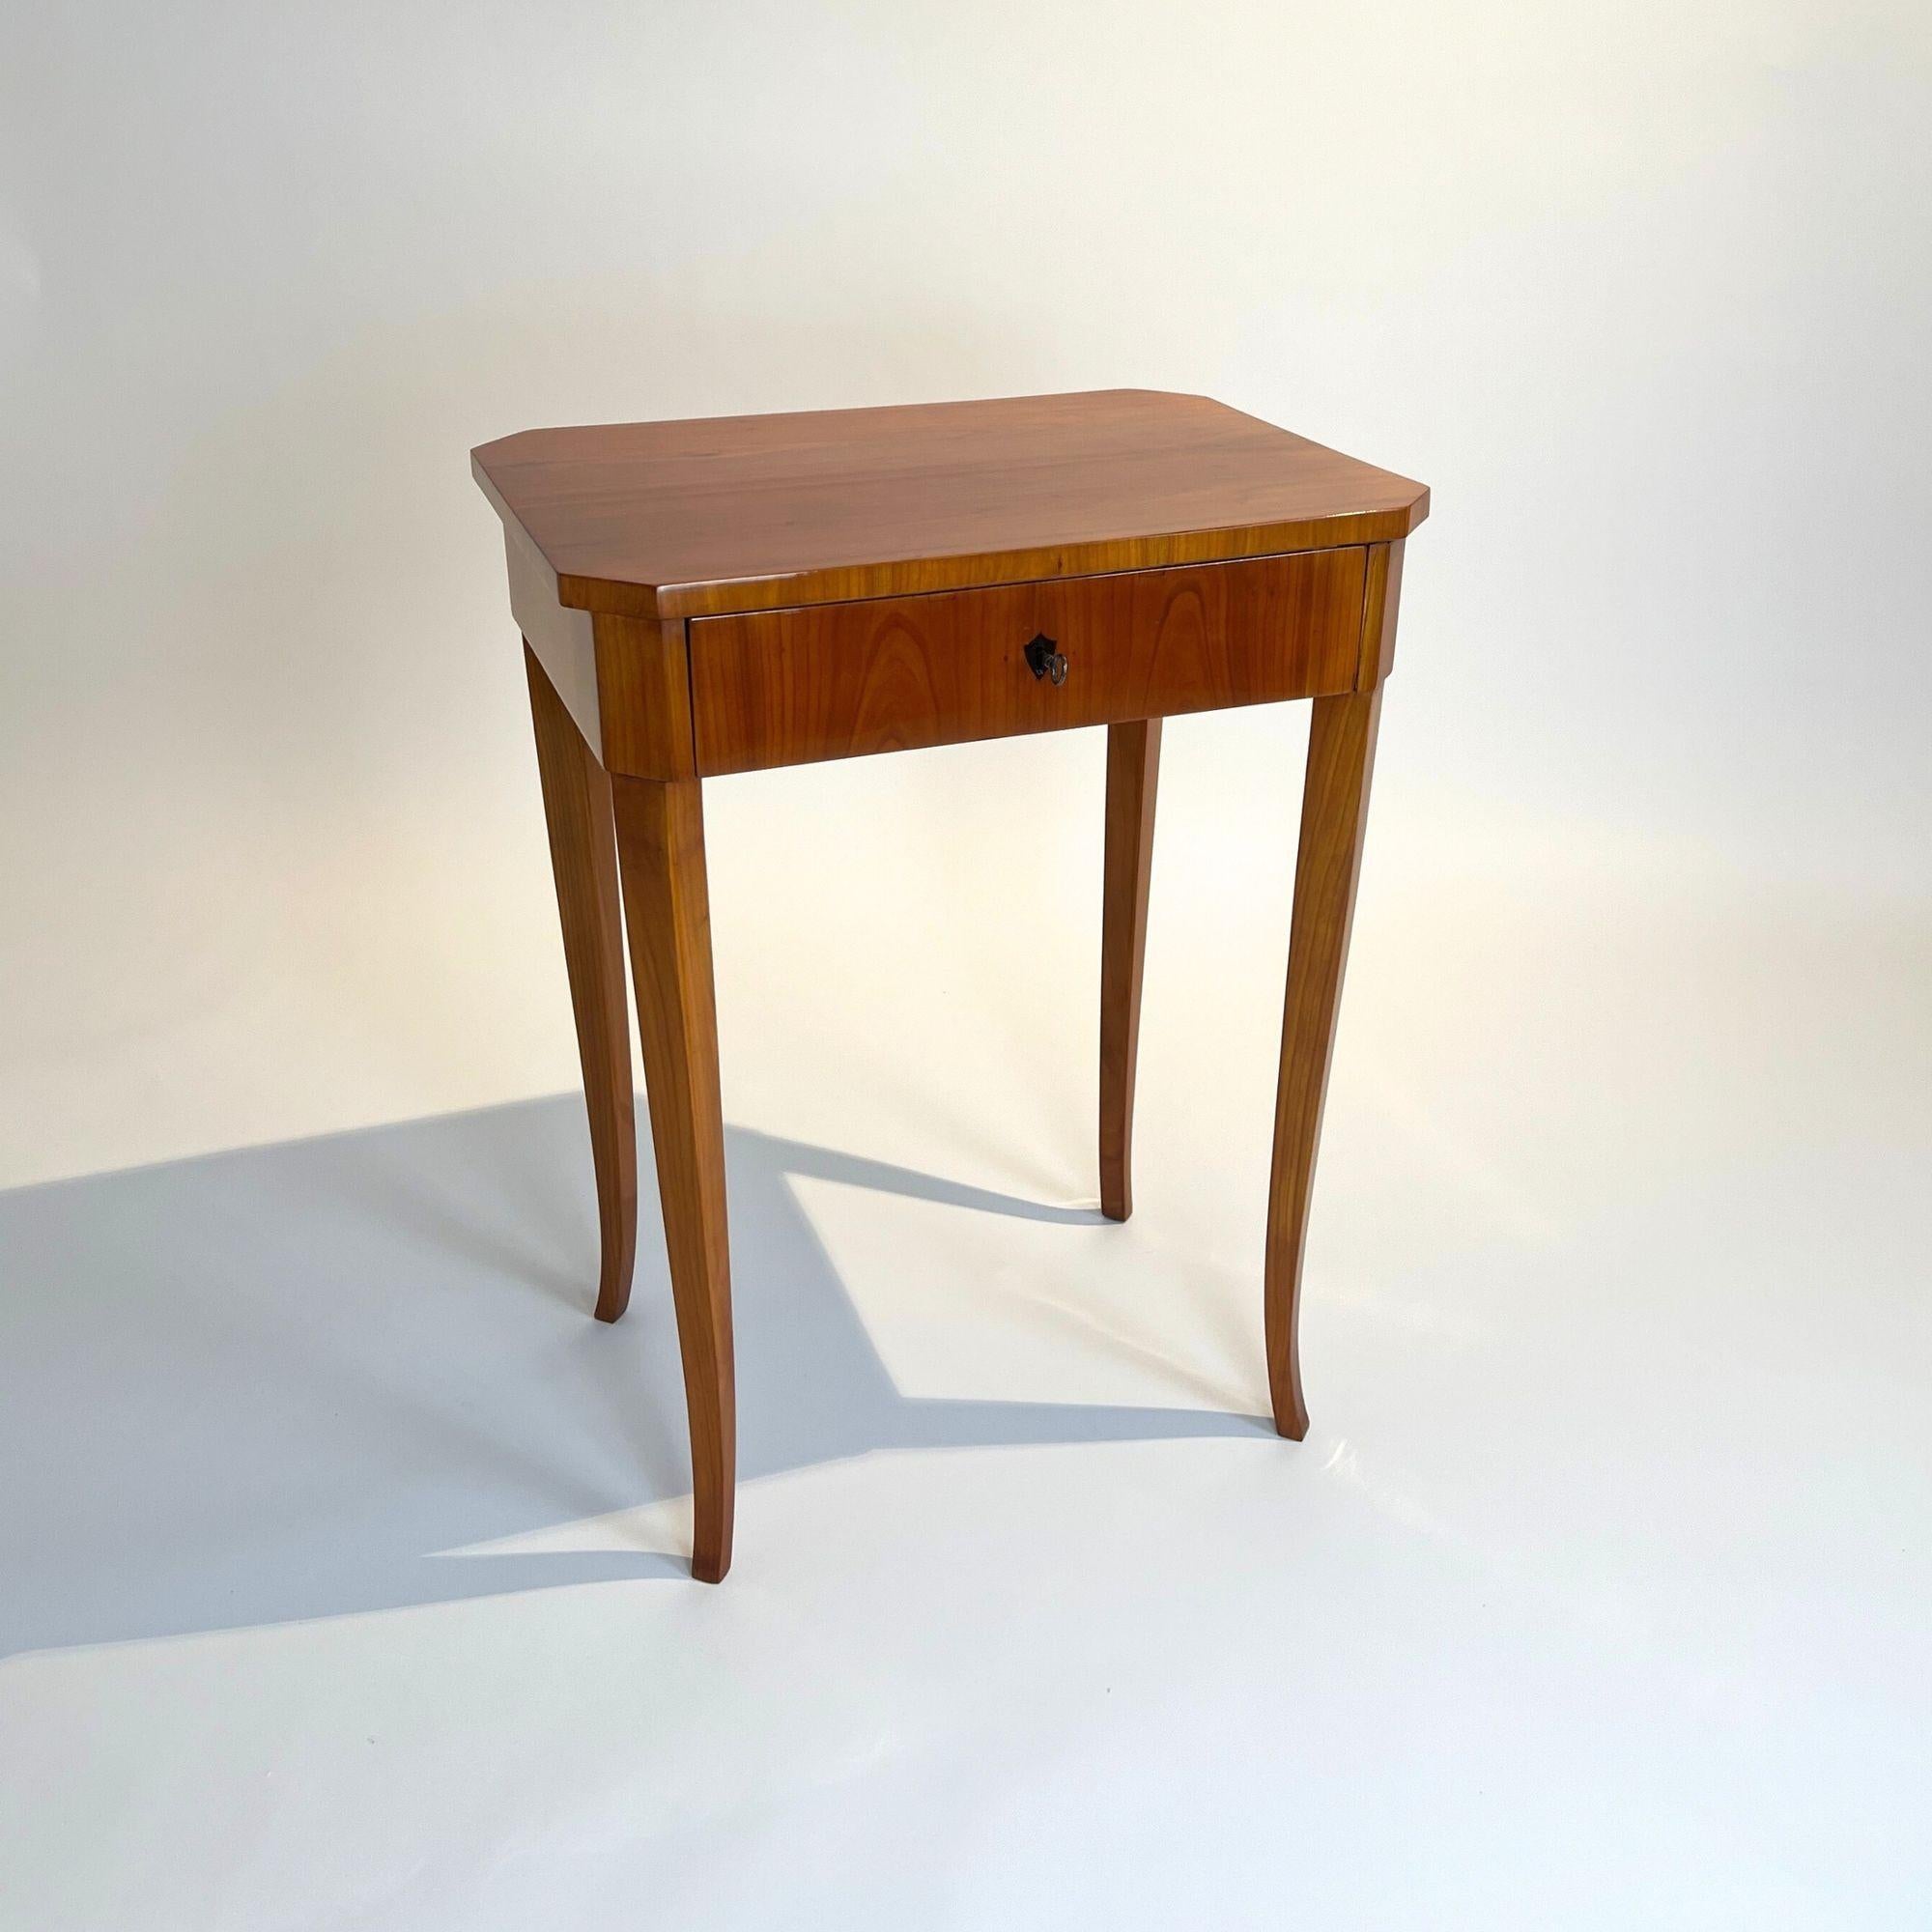 Elegant Biedermeier side or sewing table from southern Germany around 1830.
Cherry wood veneered on softwood and solid cherry.
Ebonized key escutcheon. One drawer, lockable and with removable interior.
Restored condition, hand polished with